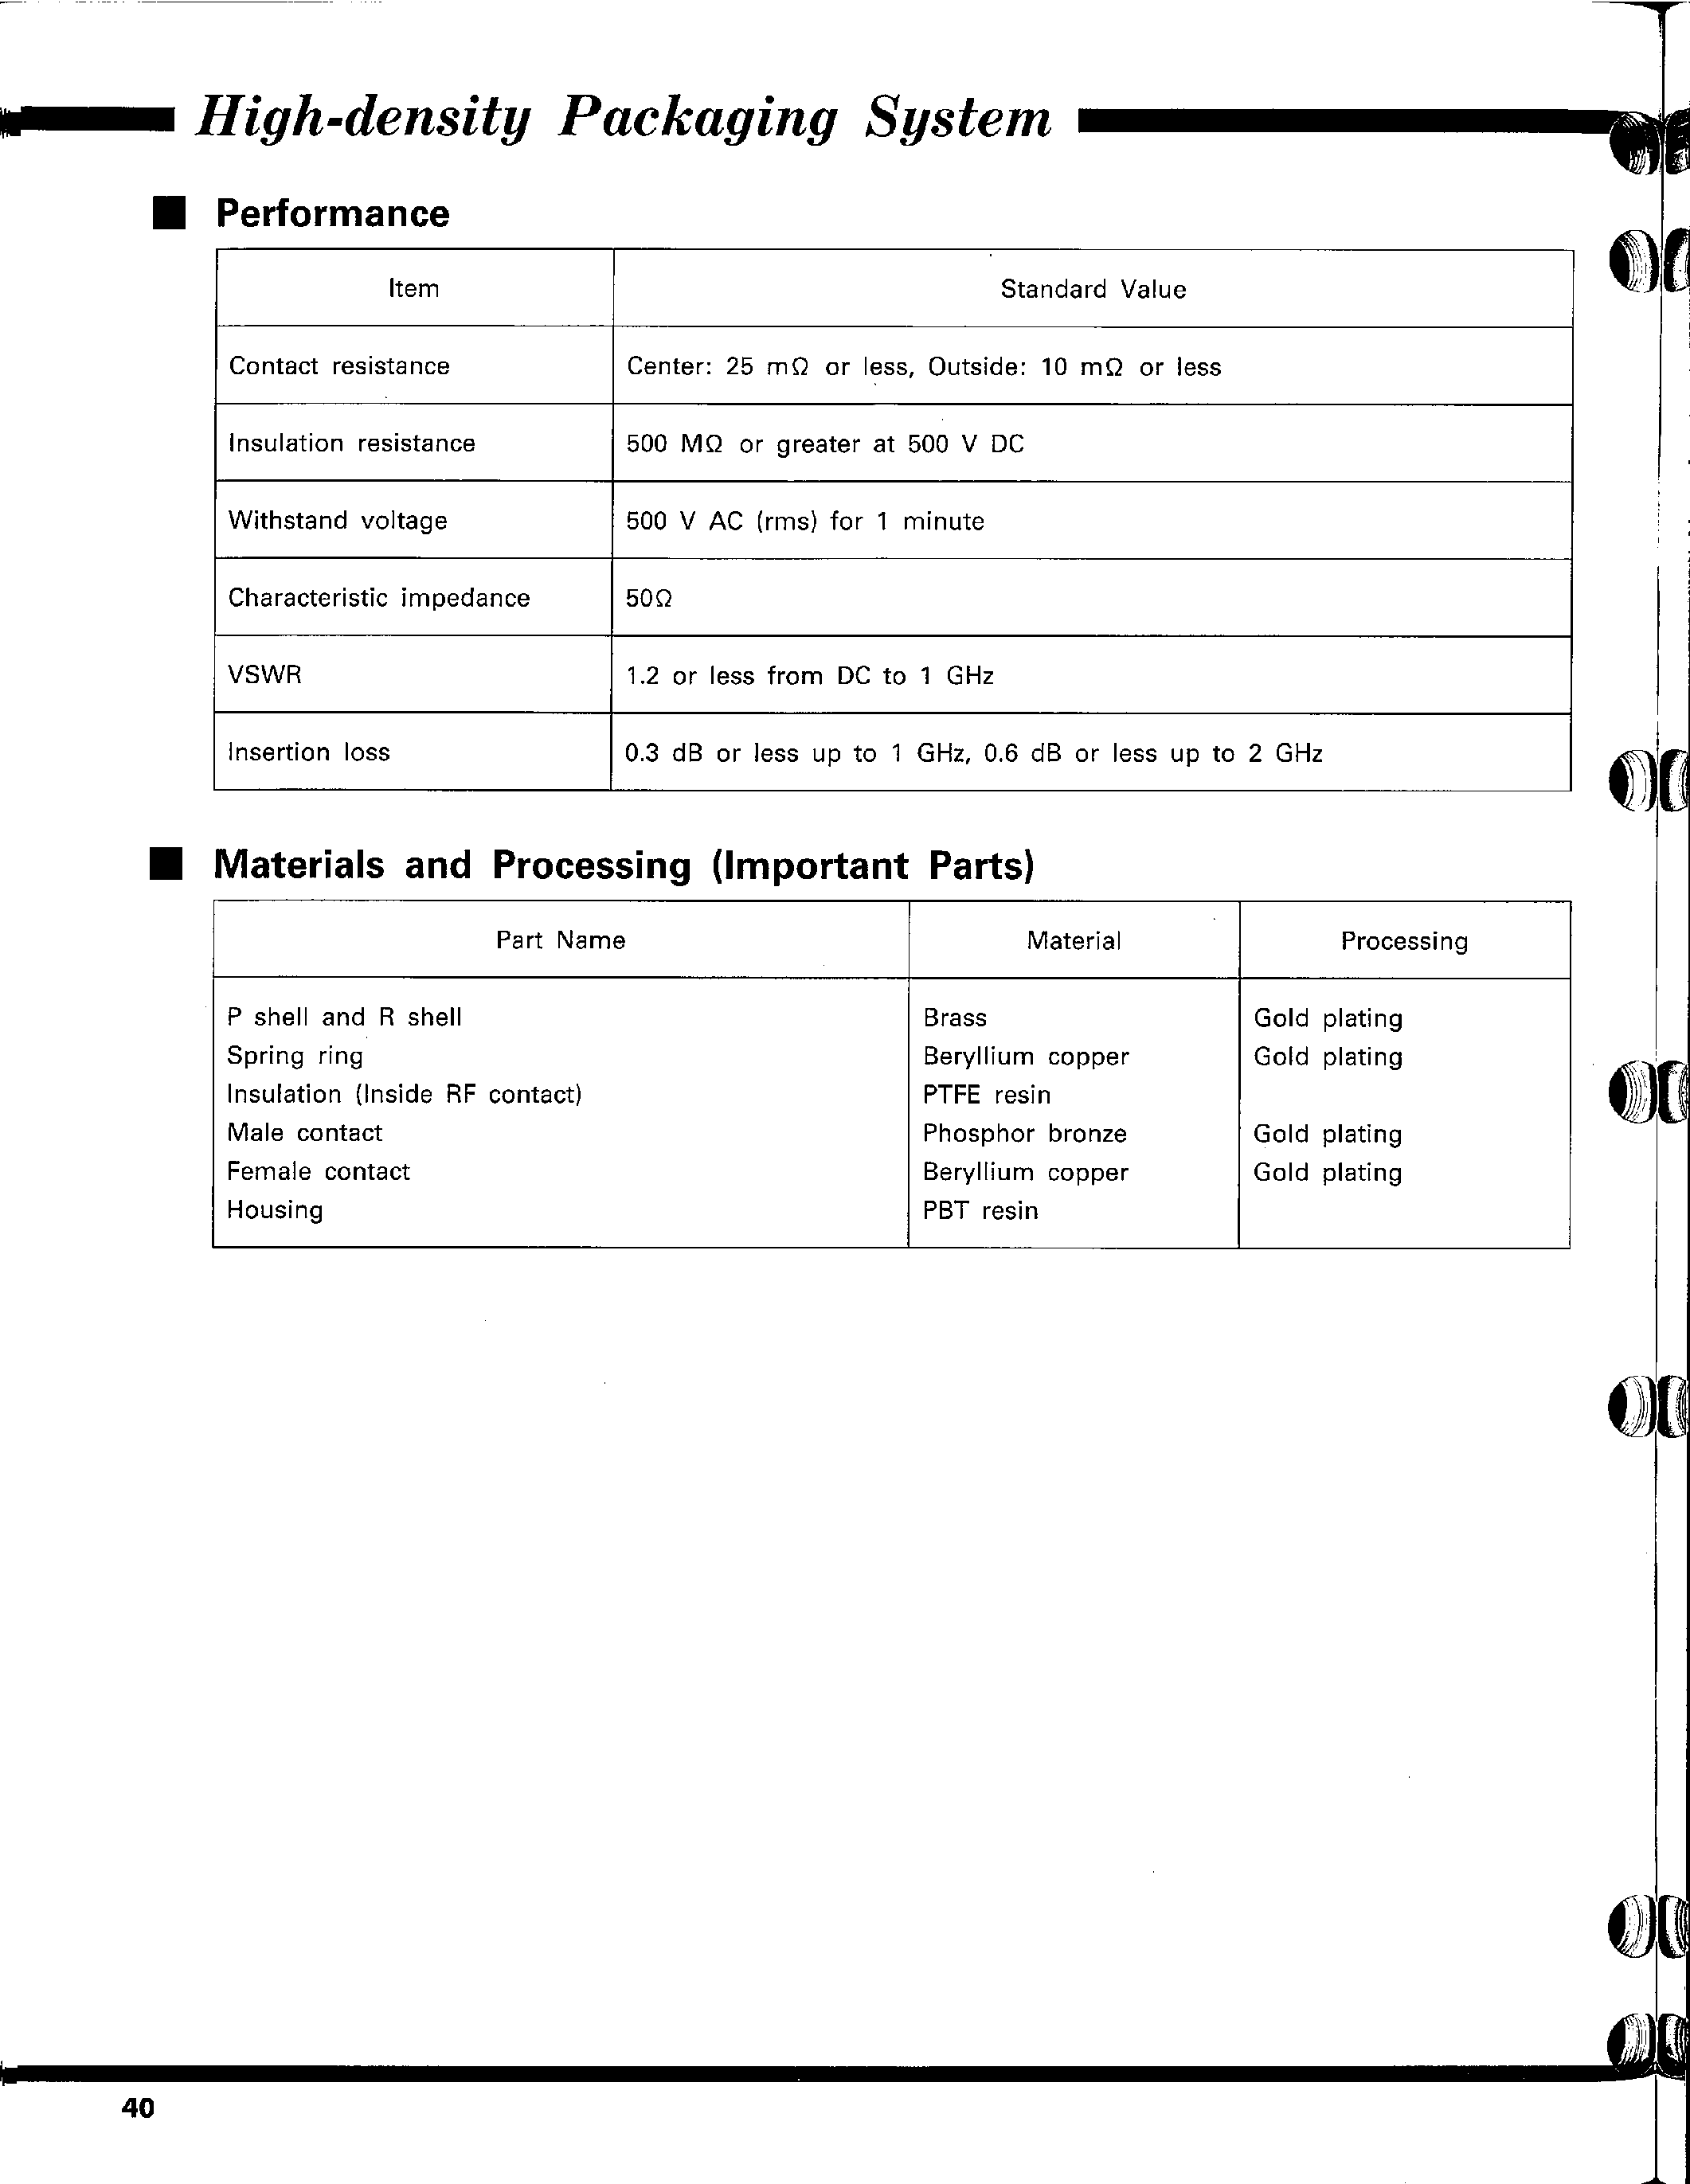 Datasheet PO55-14LR-PC-Z - High-density Packaging System(Coaxial Connectors for Hi-PAS Mounting) page 2